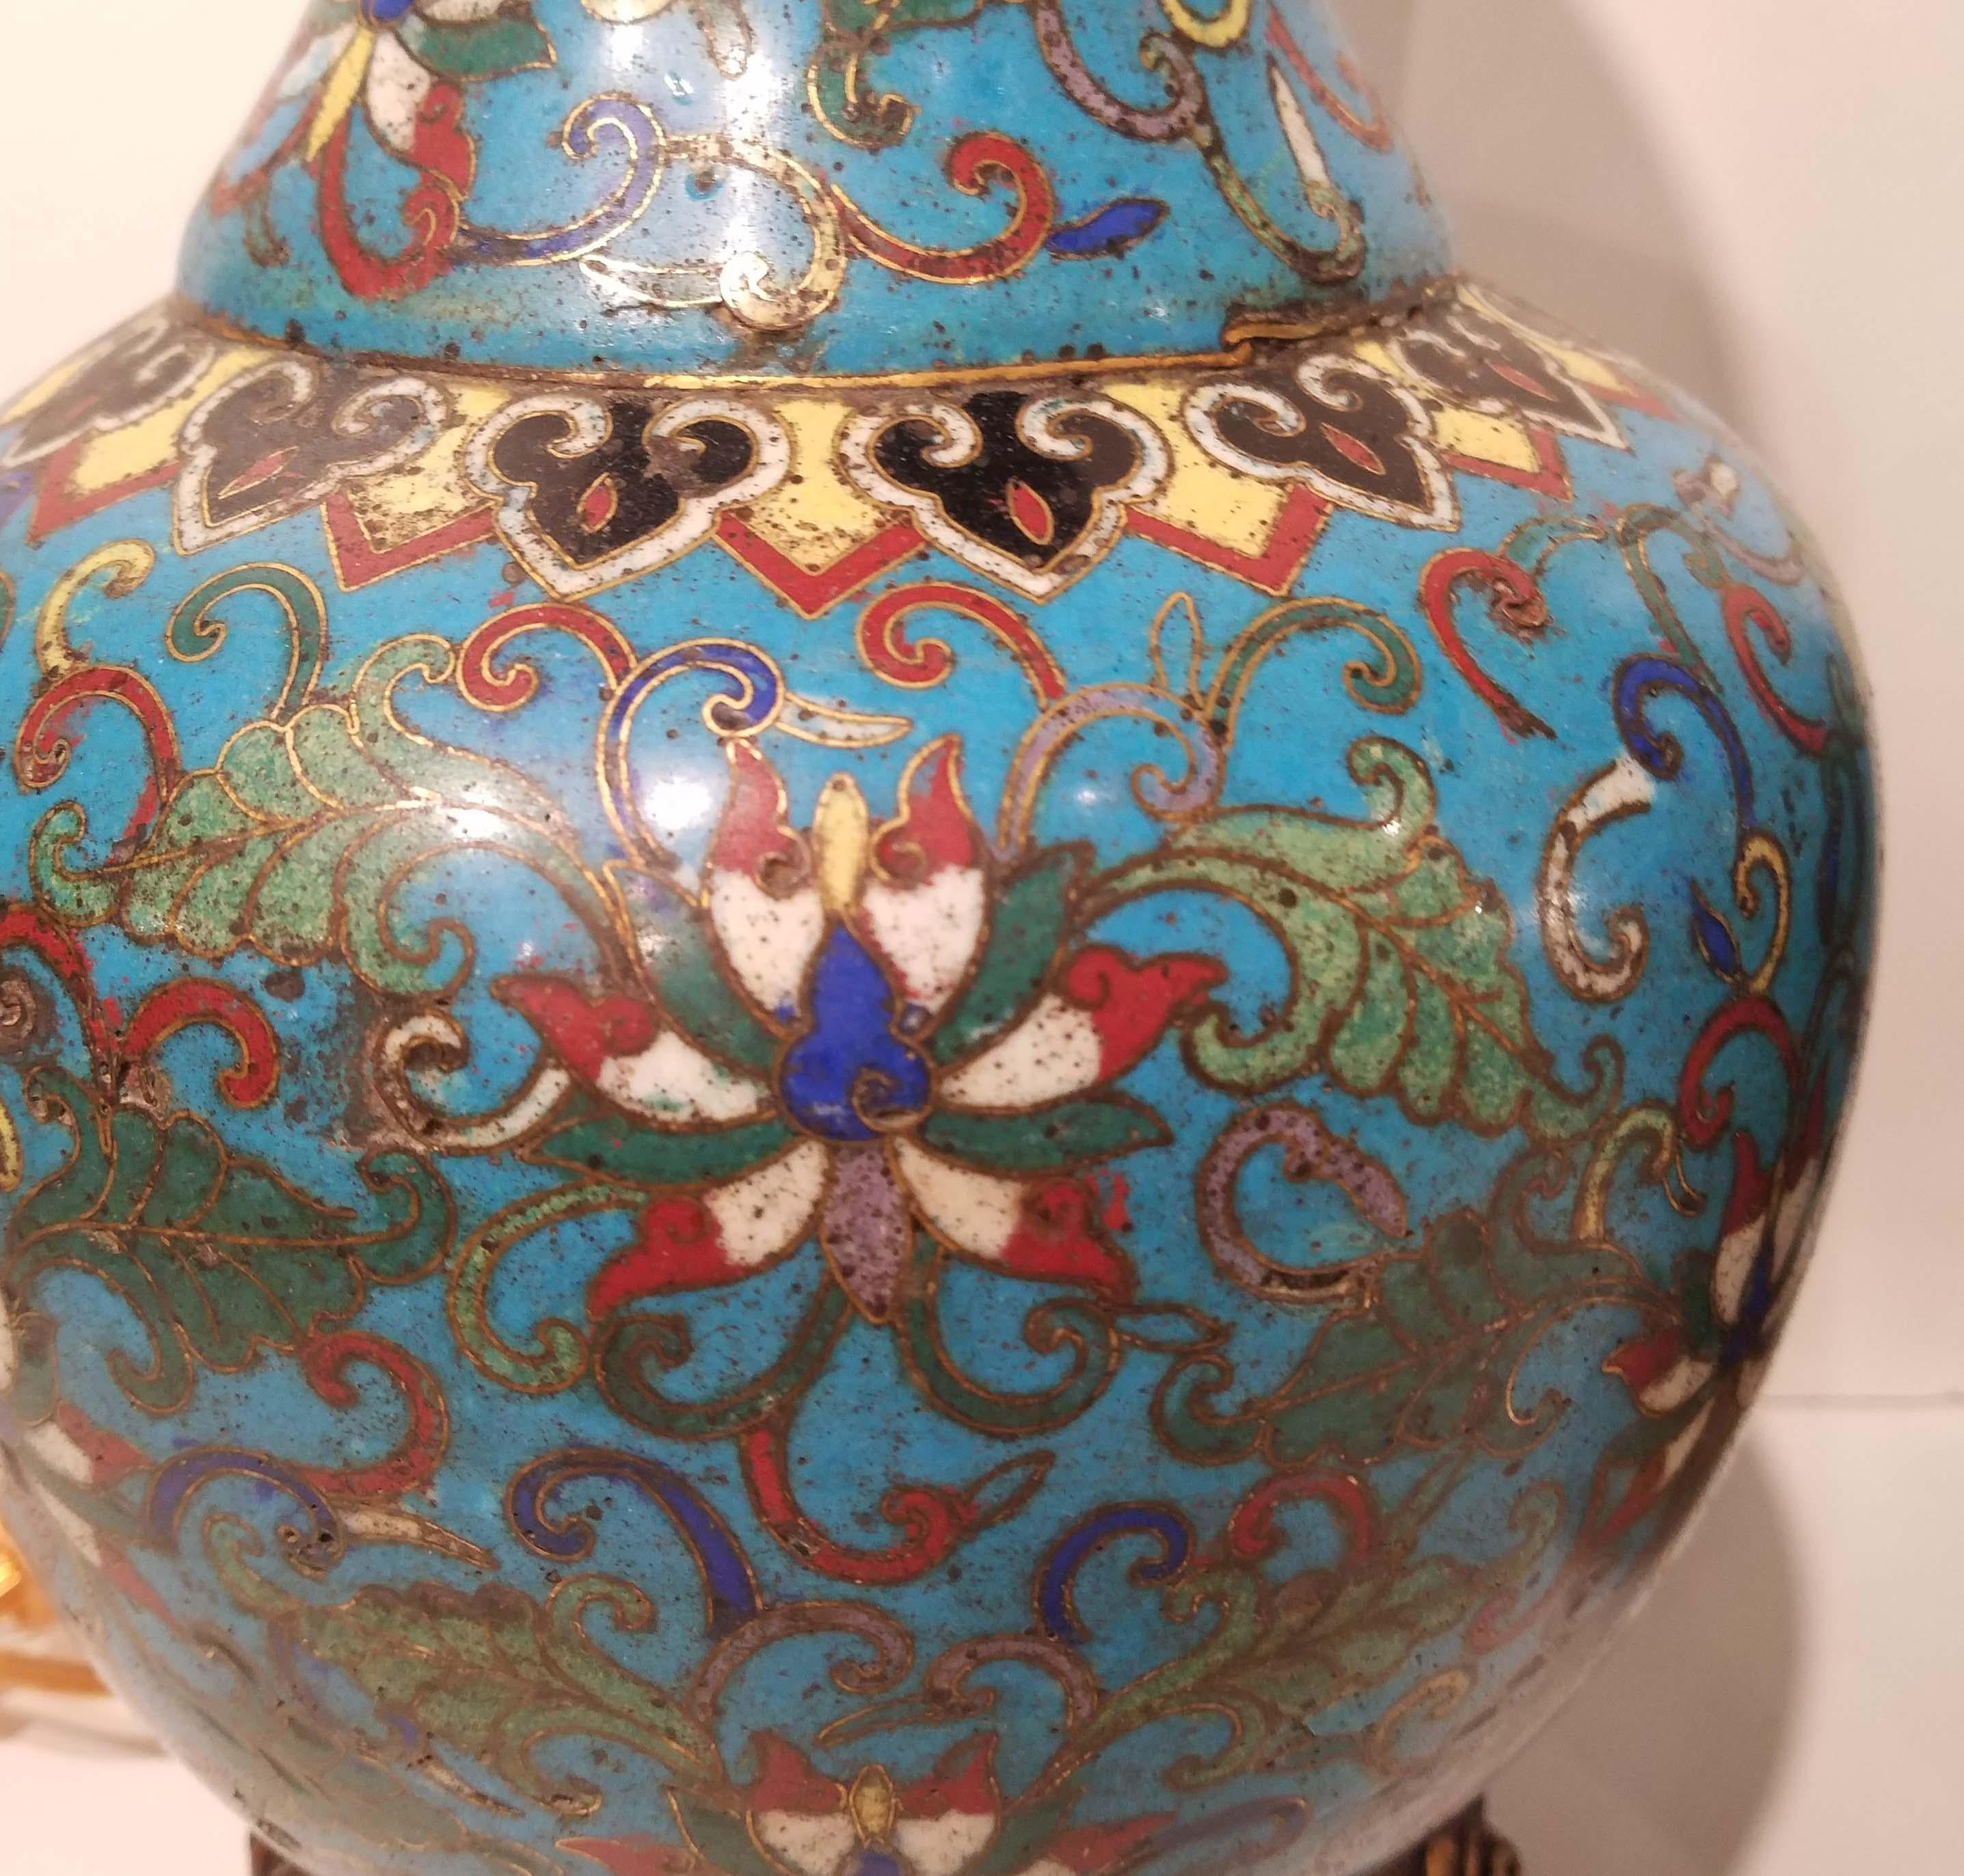 Enameled Pair of Chinese Cloisonné Vases Made into Lamps, 18th Century